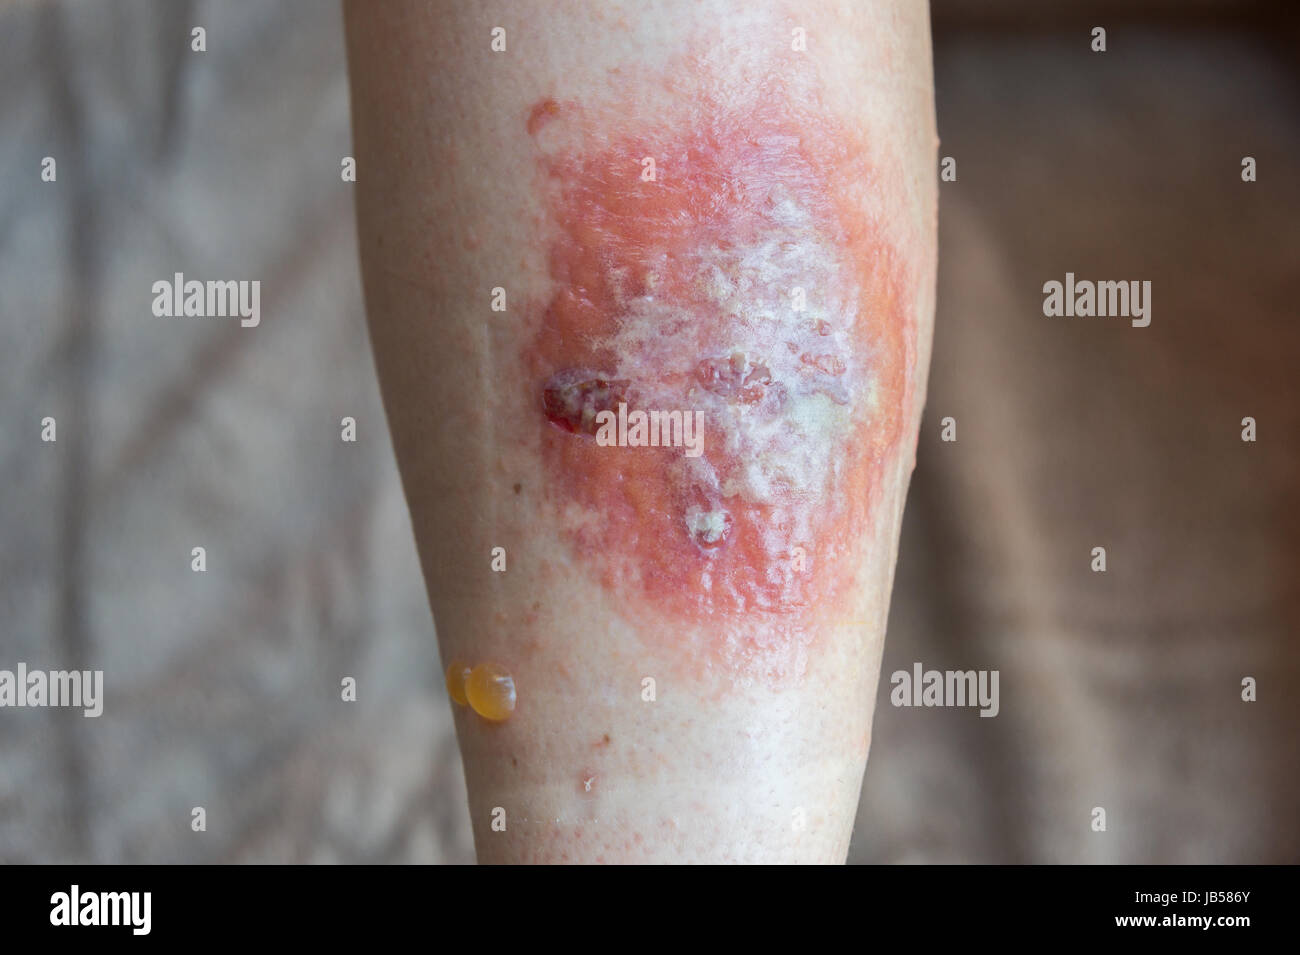 Poison Ivy rash and blisters on a leg Stock Photo